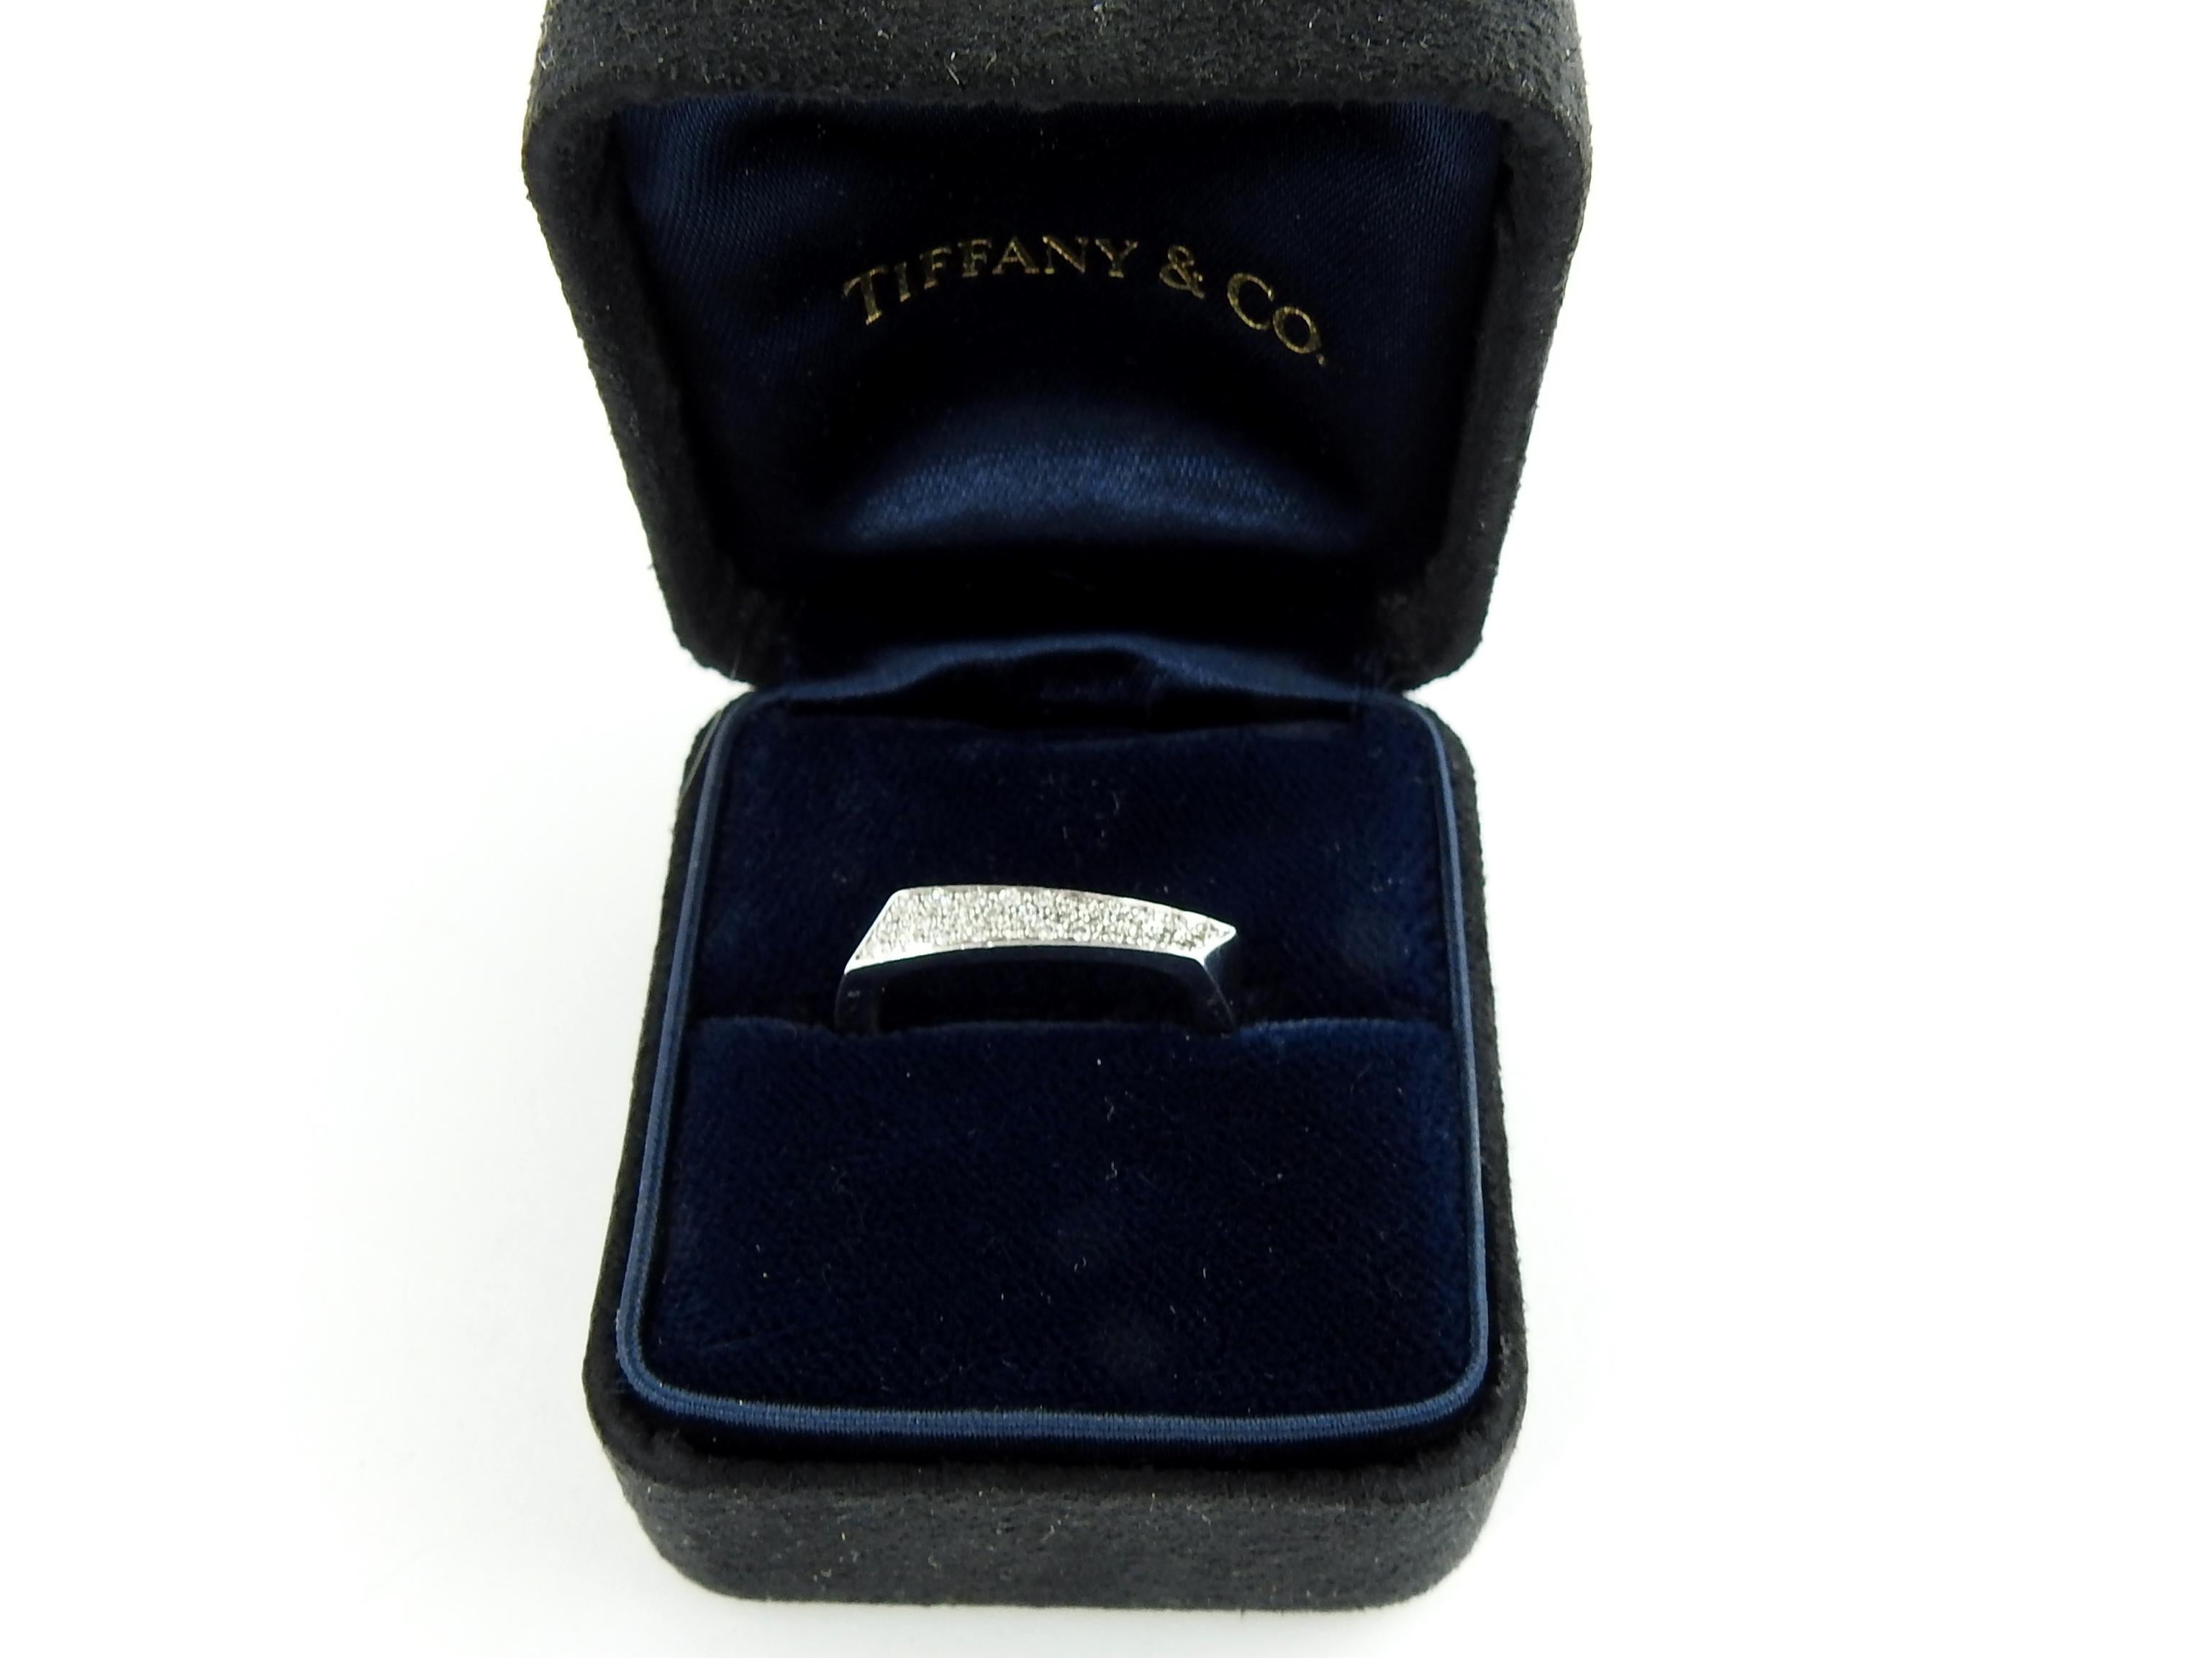 Tiffany & Co. Frank Gehry 18K White Gold Diamond Torque Ring Size 6.5 Box 3